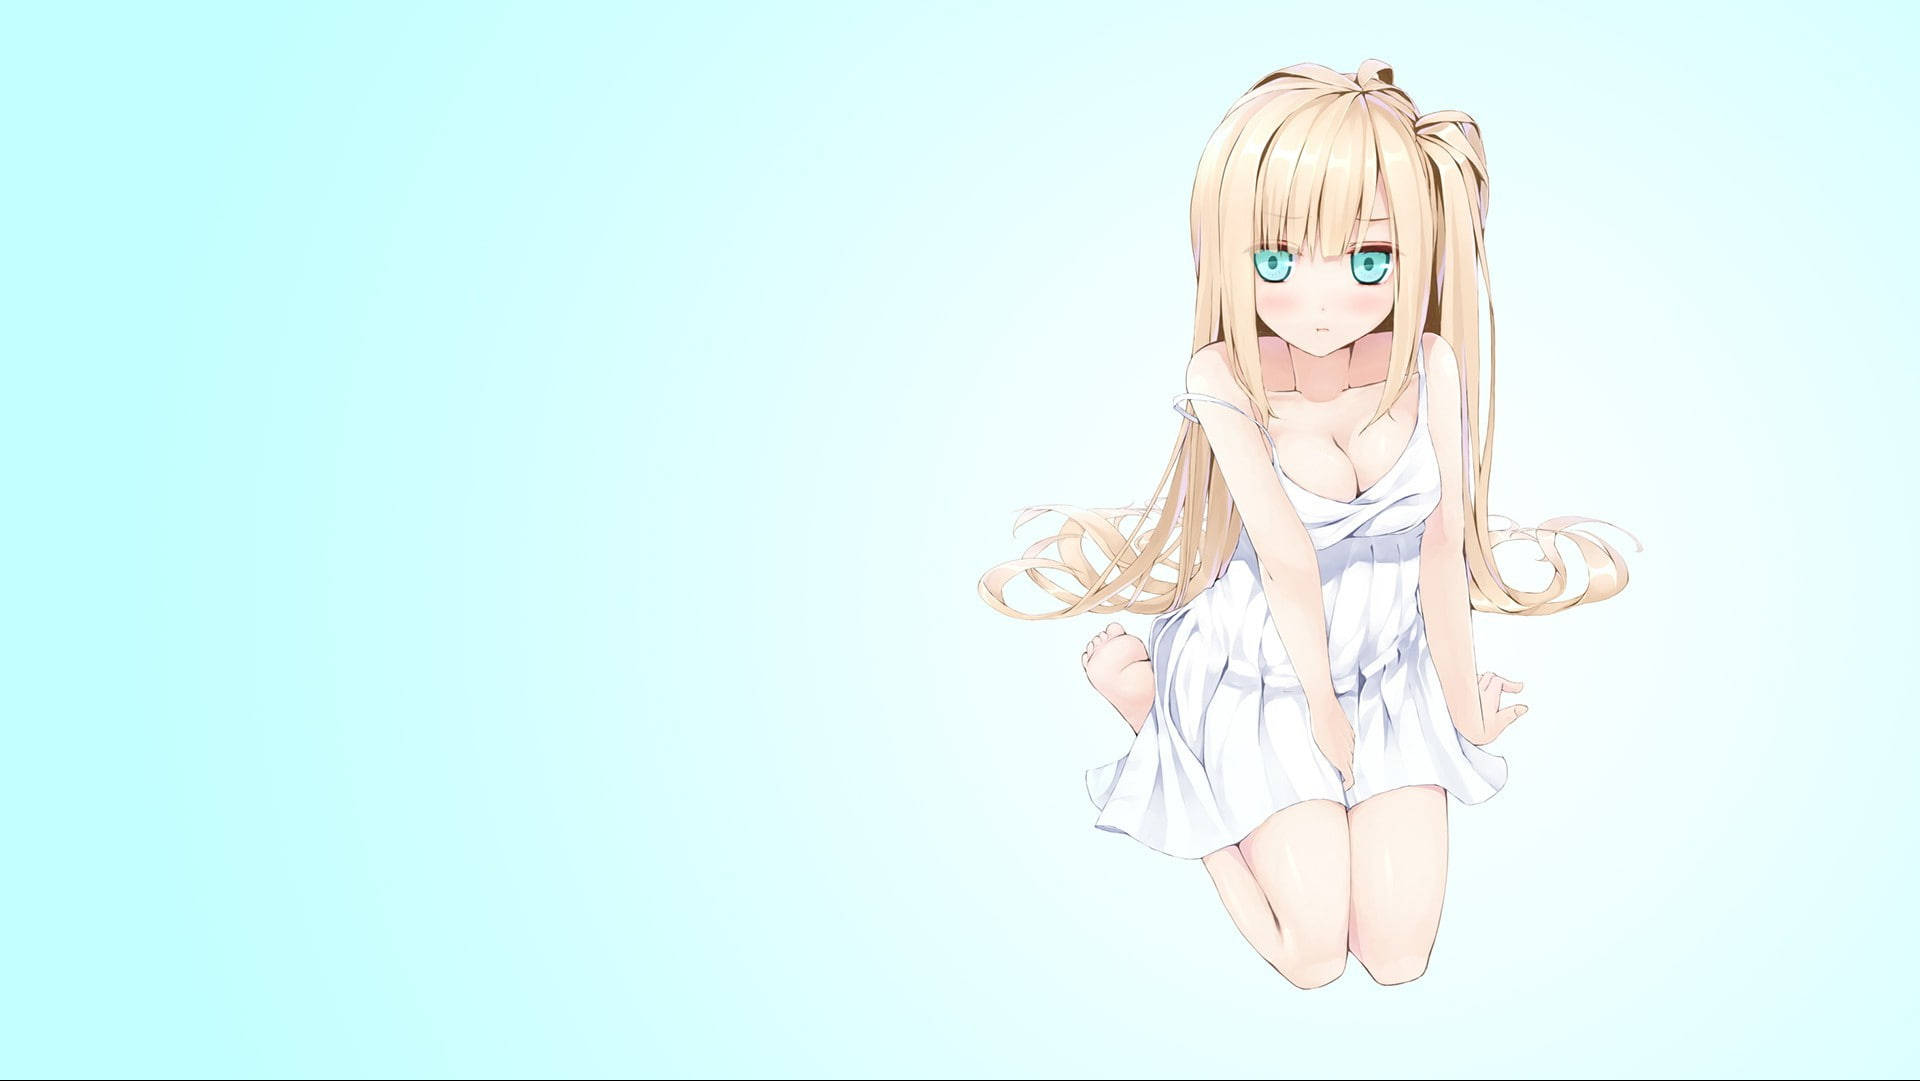 Sexy Anime Girl In White Dress Background